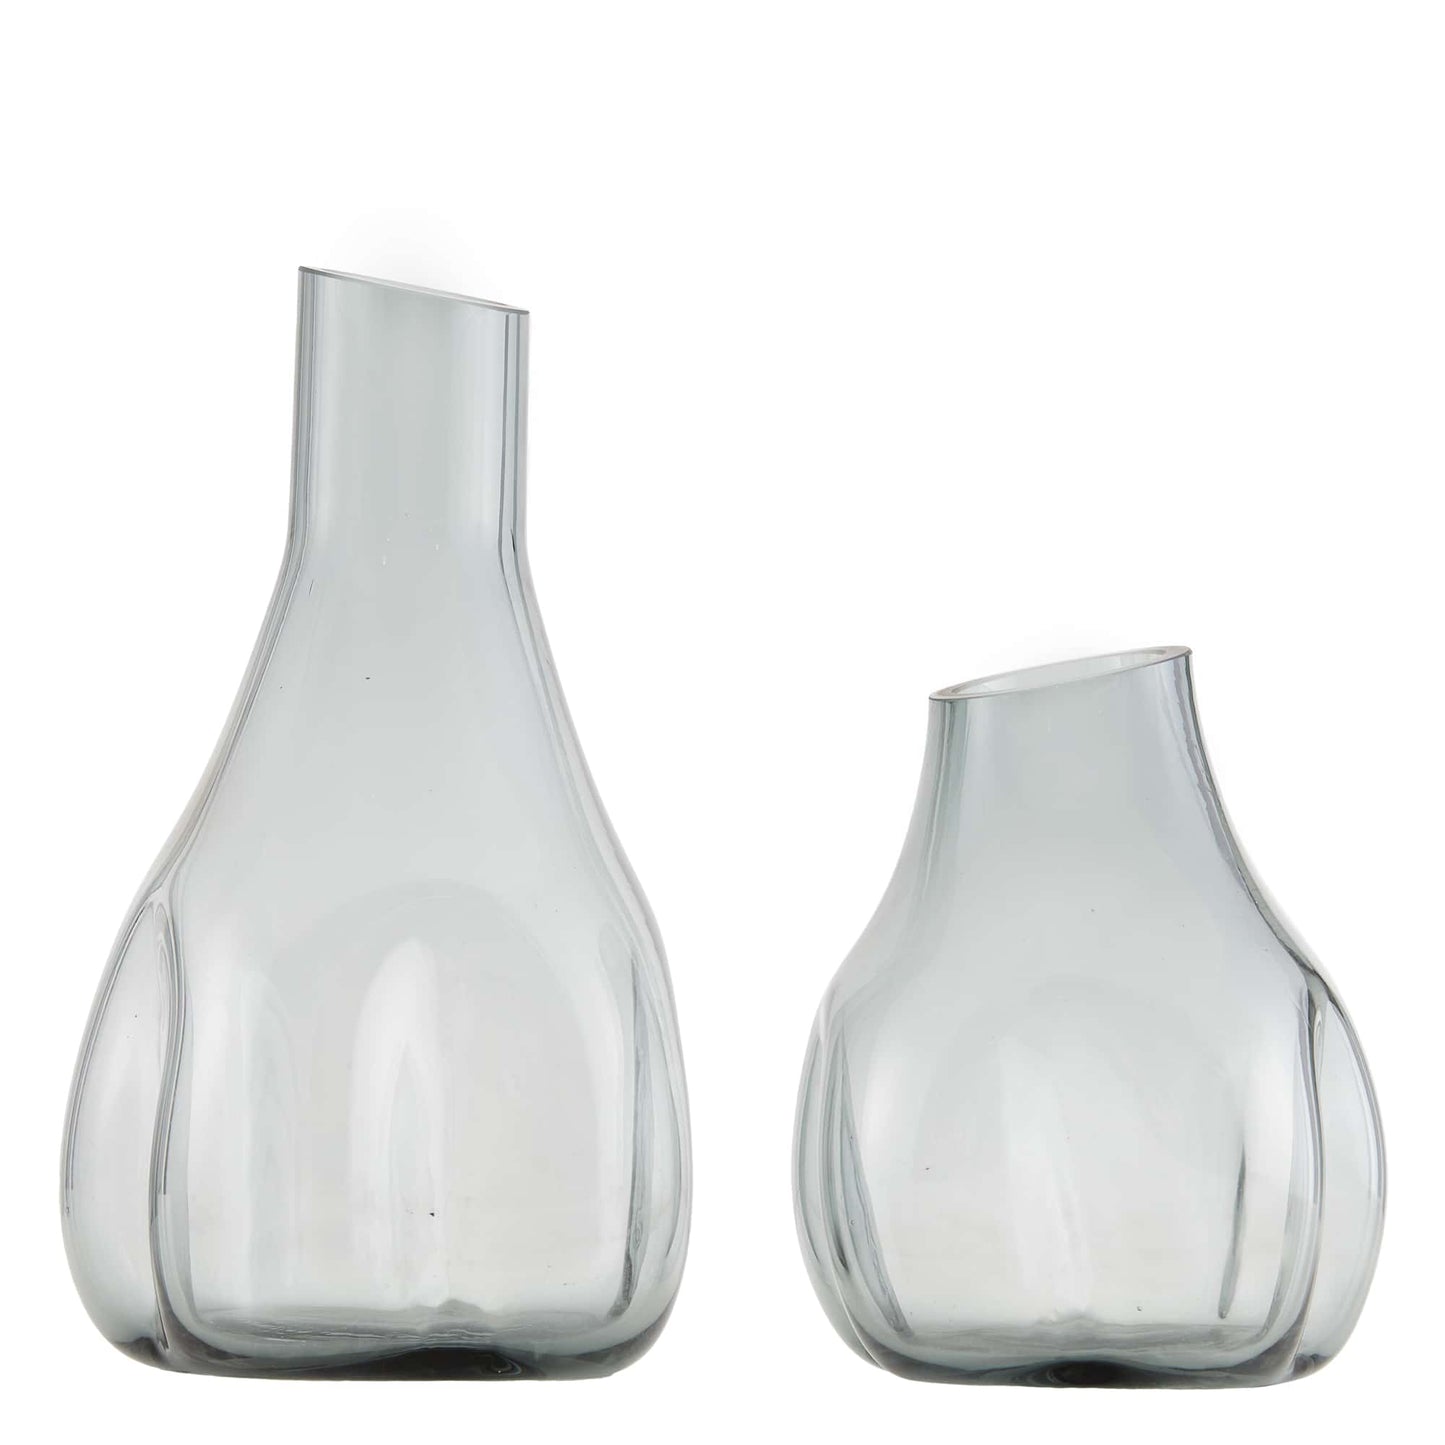 Rampart Vases - Set of 2 Blue Smoke Glass Vessels with Angled Openings